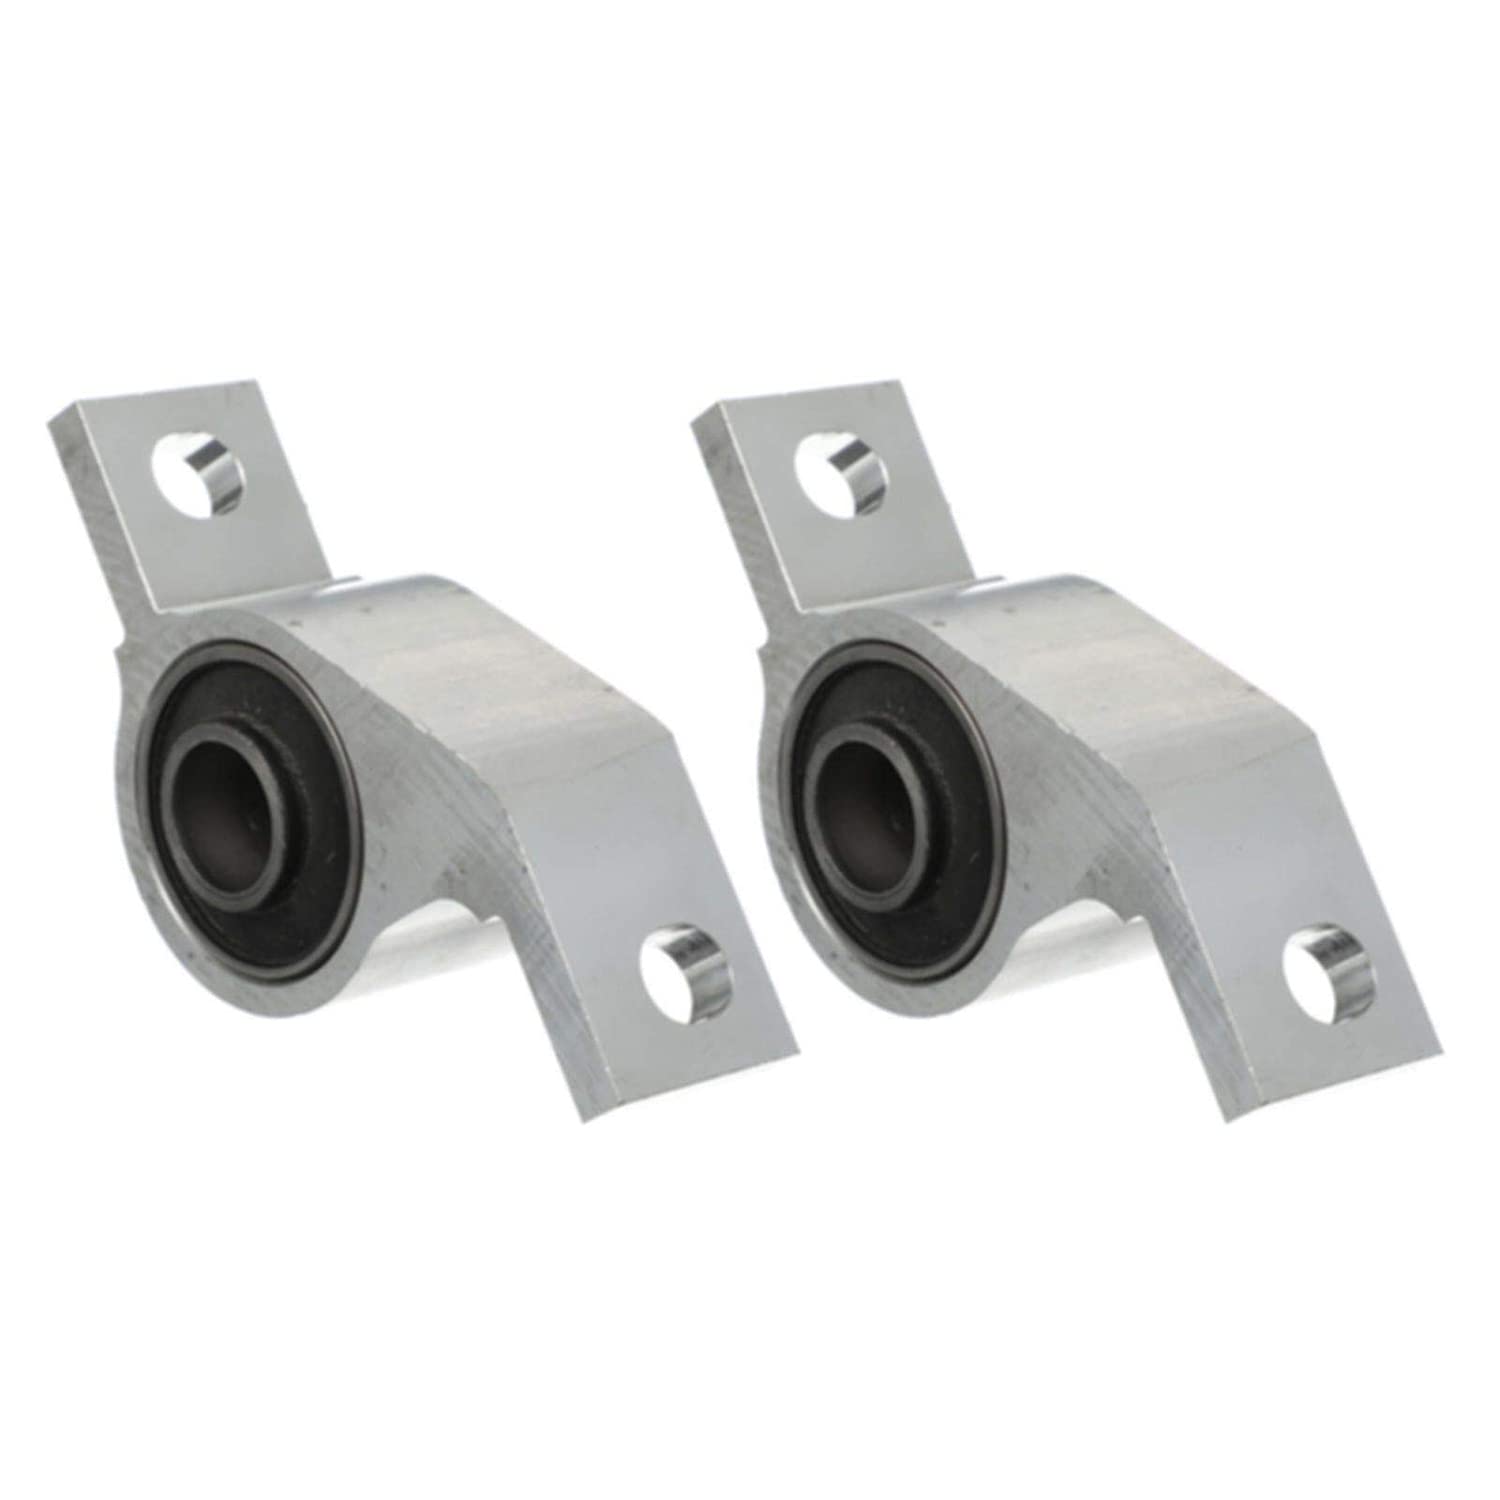 Quality 2000-2002 Subаru Fоrеstеr Front Control Arm Rear Bushing Left Right Set OEM New Fast Ship and Discount!